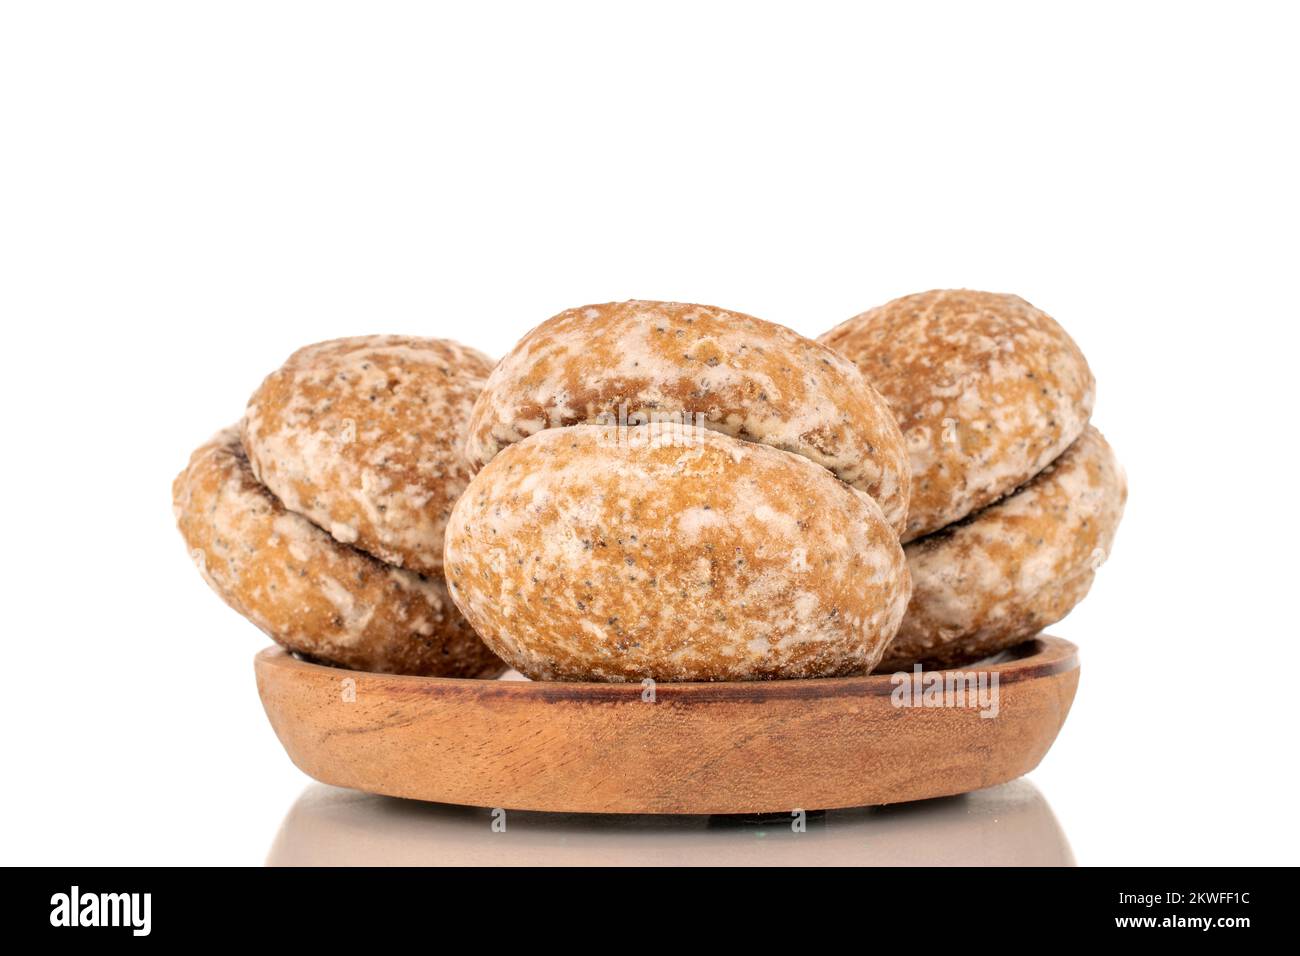 Several sweet tasty gingerbread cookies on a wooden plate, macro, isolated on white background. Stock Photo